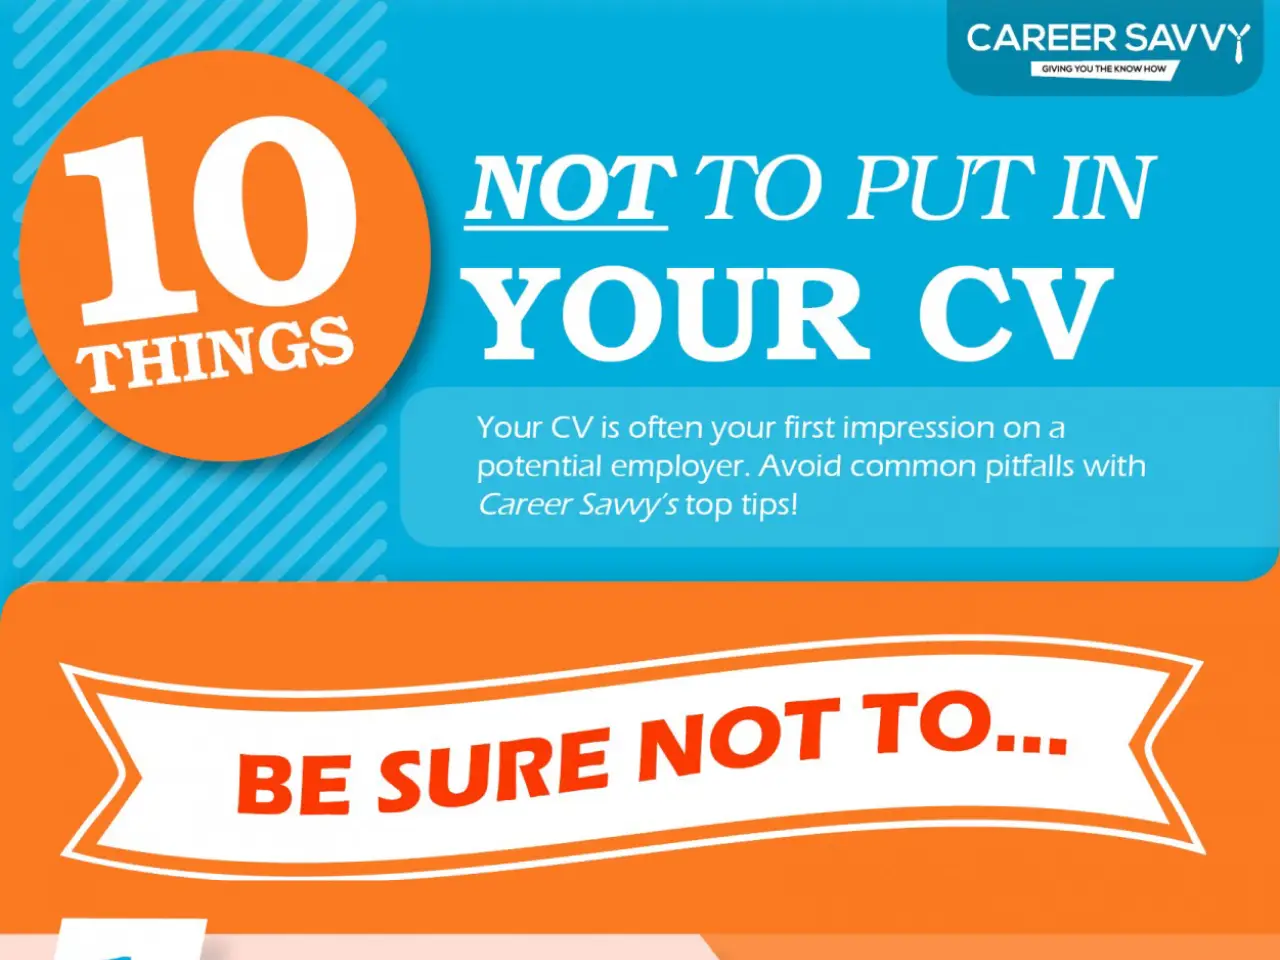 10 Strictly NO Commandments For Your CV